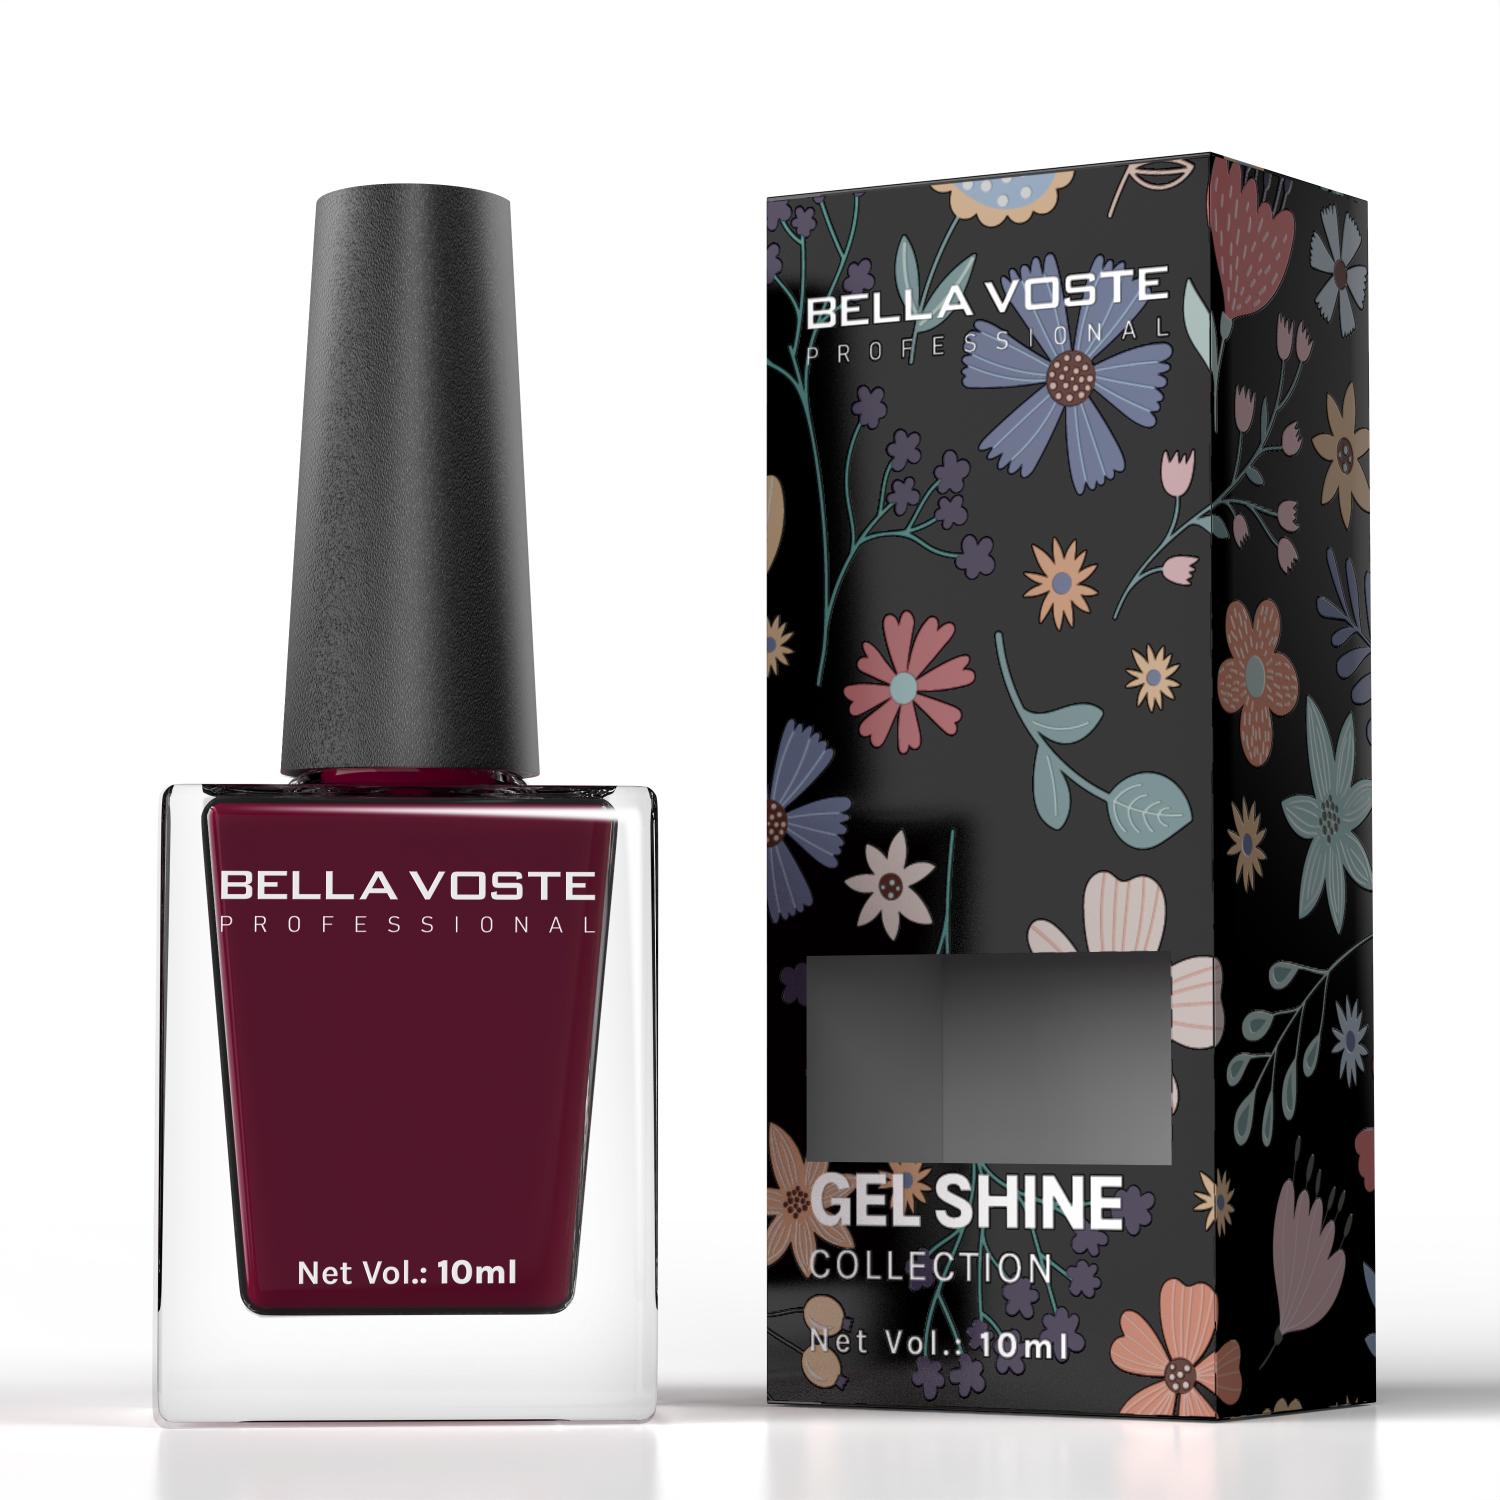 Bella Voste Nail Polish Review/Swatches/Purplle.com/BeautyBeam86 - YouTube